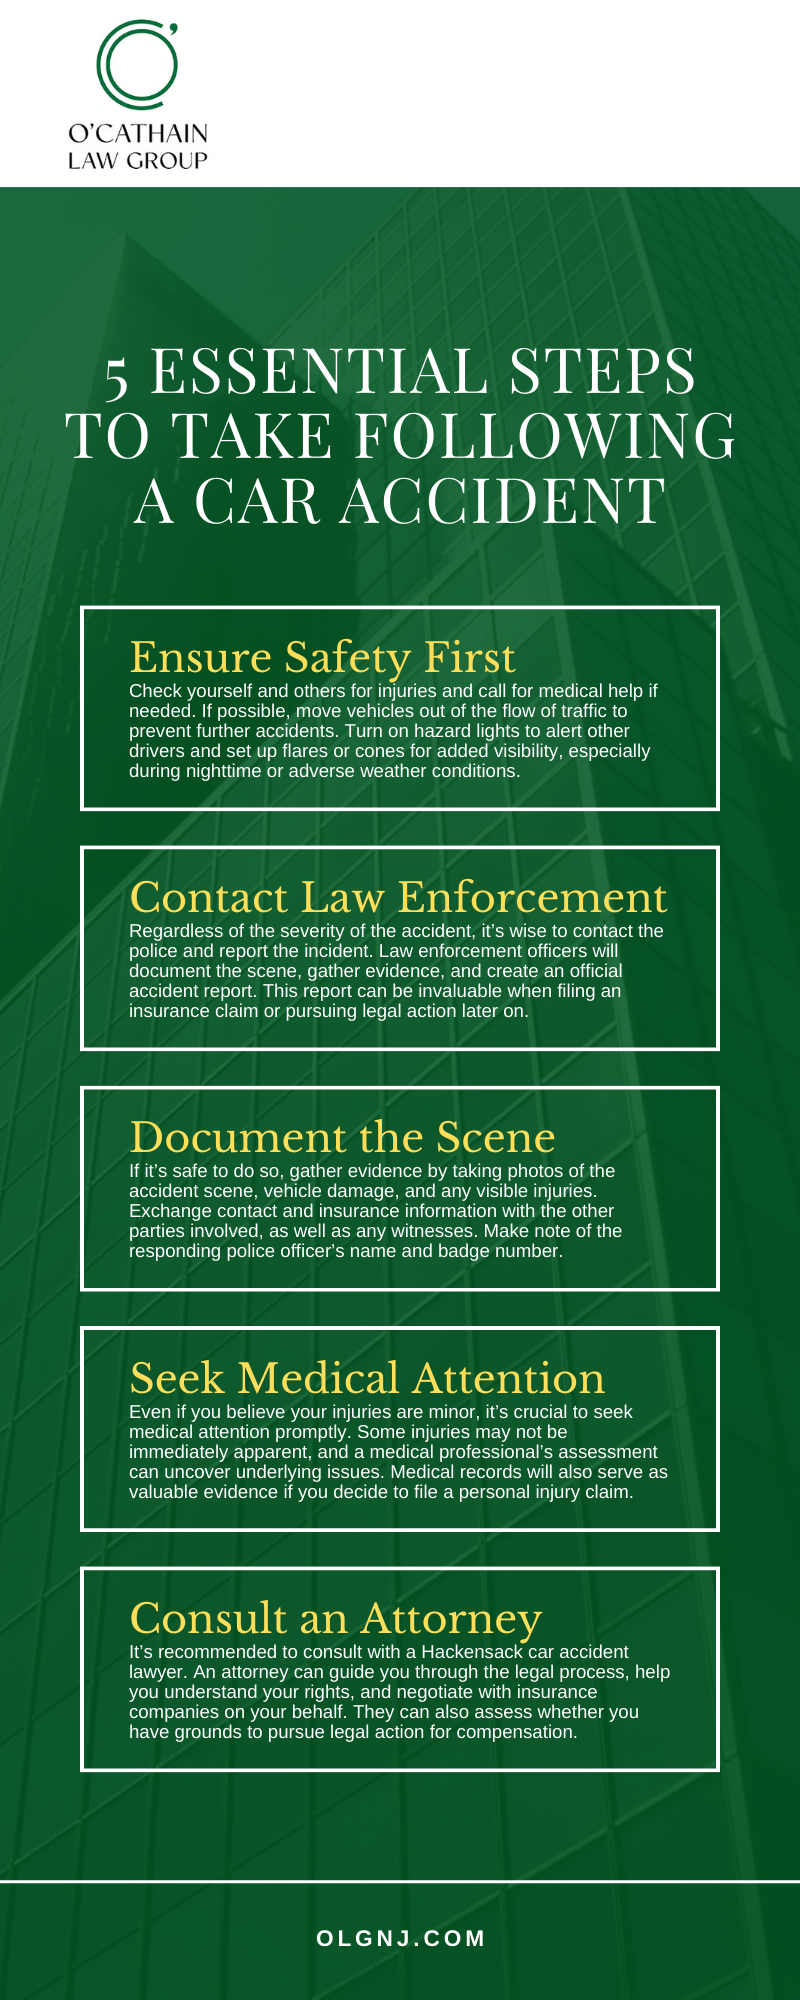 5 Essential Steps To Take Following A Car Accident Infographic